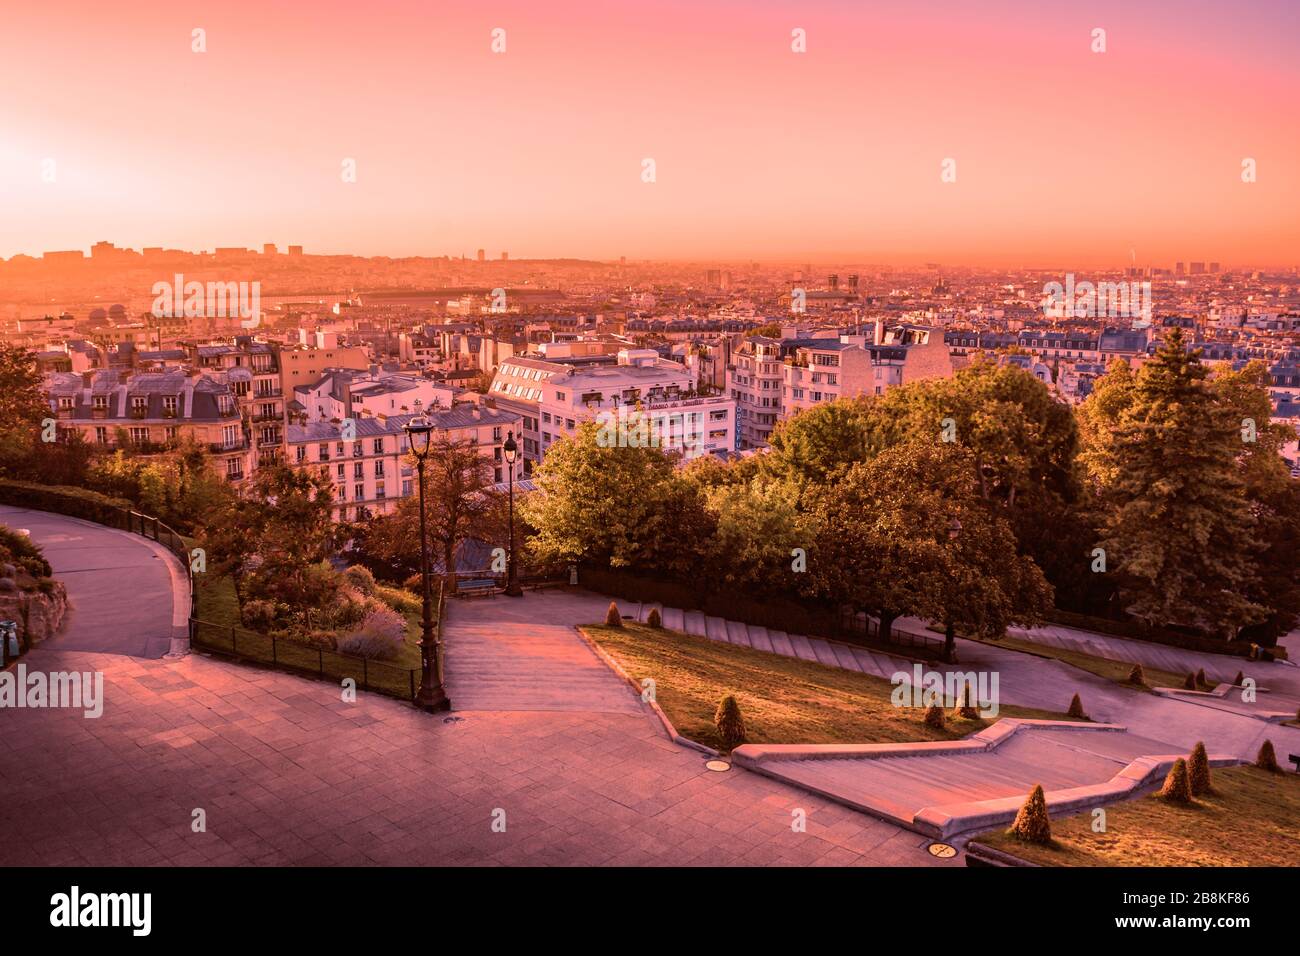 Overlooking the rooftops of Paris during a colorful and vibrant sunrise from Montmartre Hill, Paris, France taken on a warm Autumn morning Stock Photo